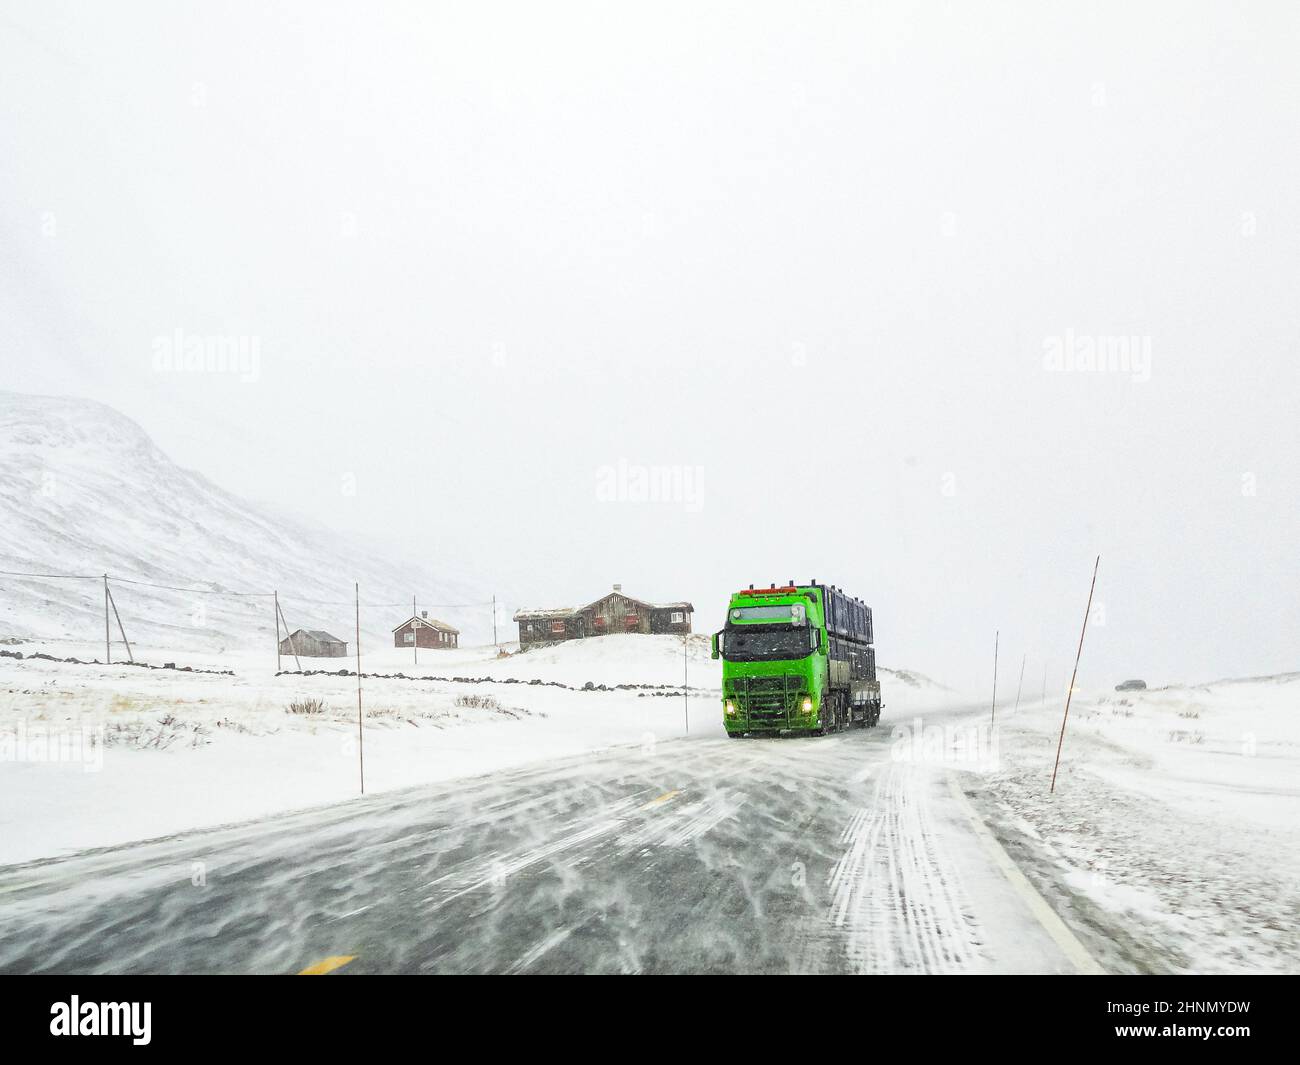 Driving through snowy road landscape, Norway. Green truck in front. Stock Photo